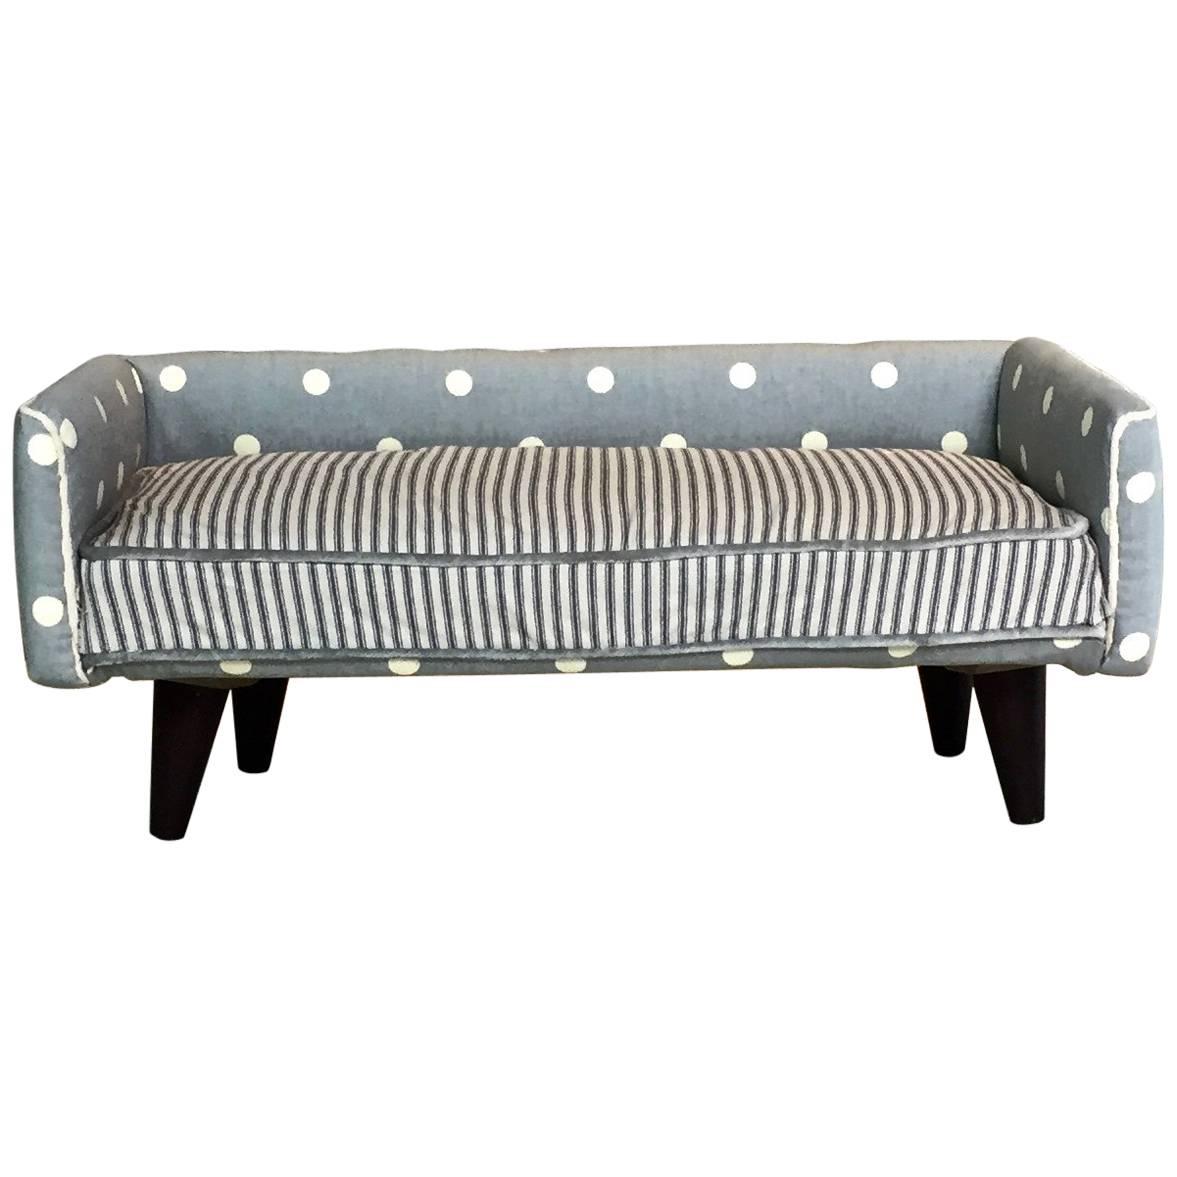 Midcentury Dogbed in Sky-Blue Polka Dot  For Sale